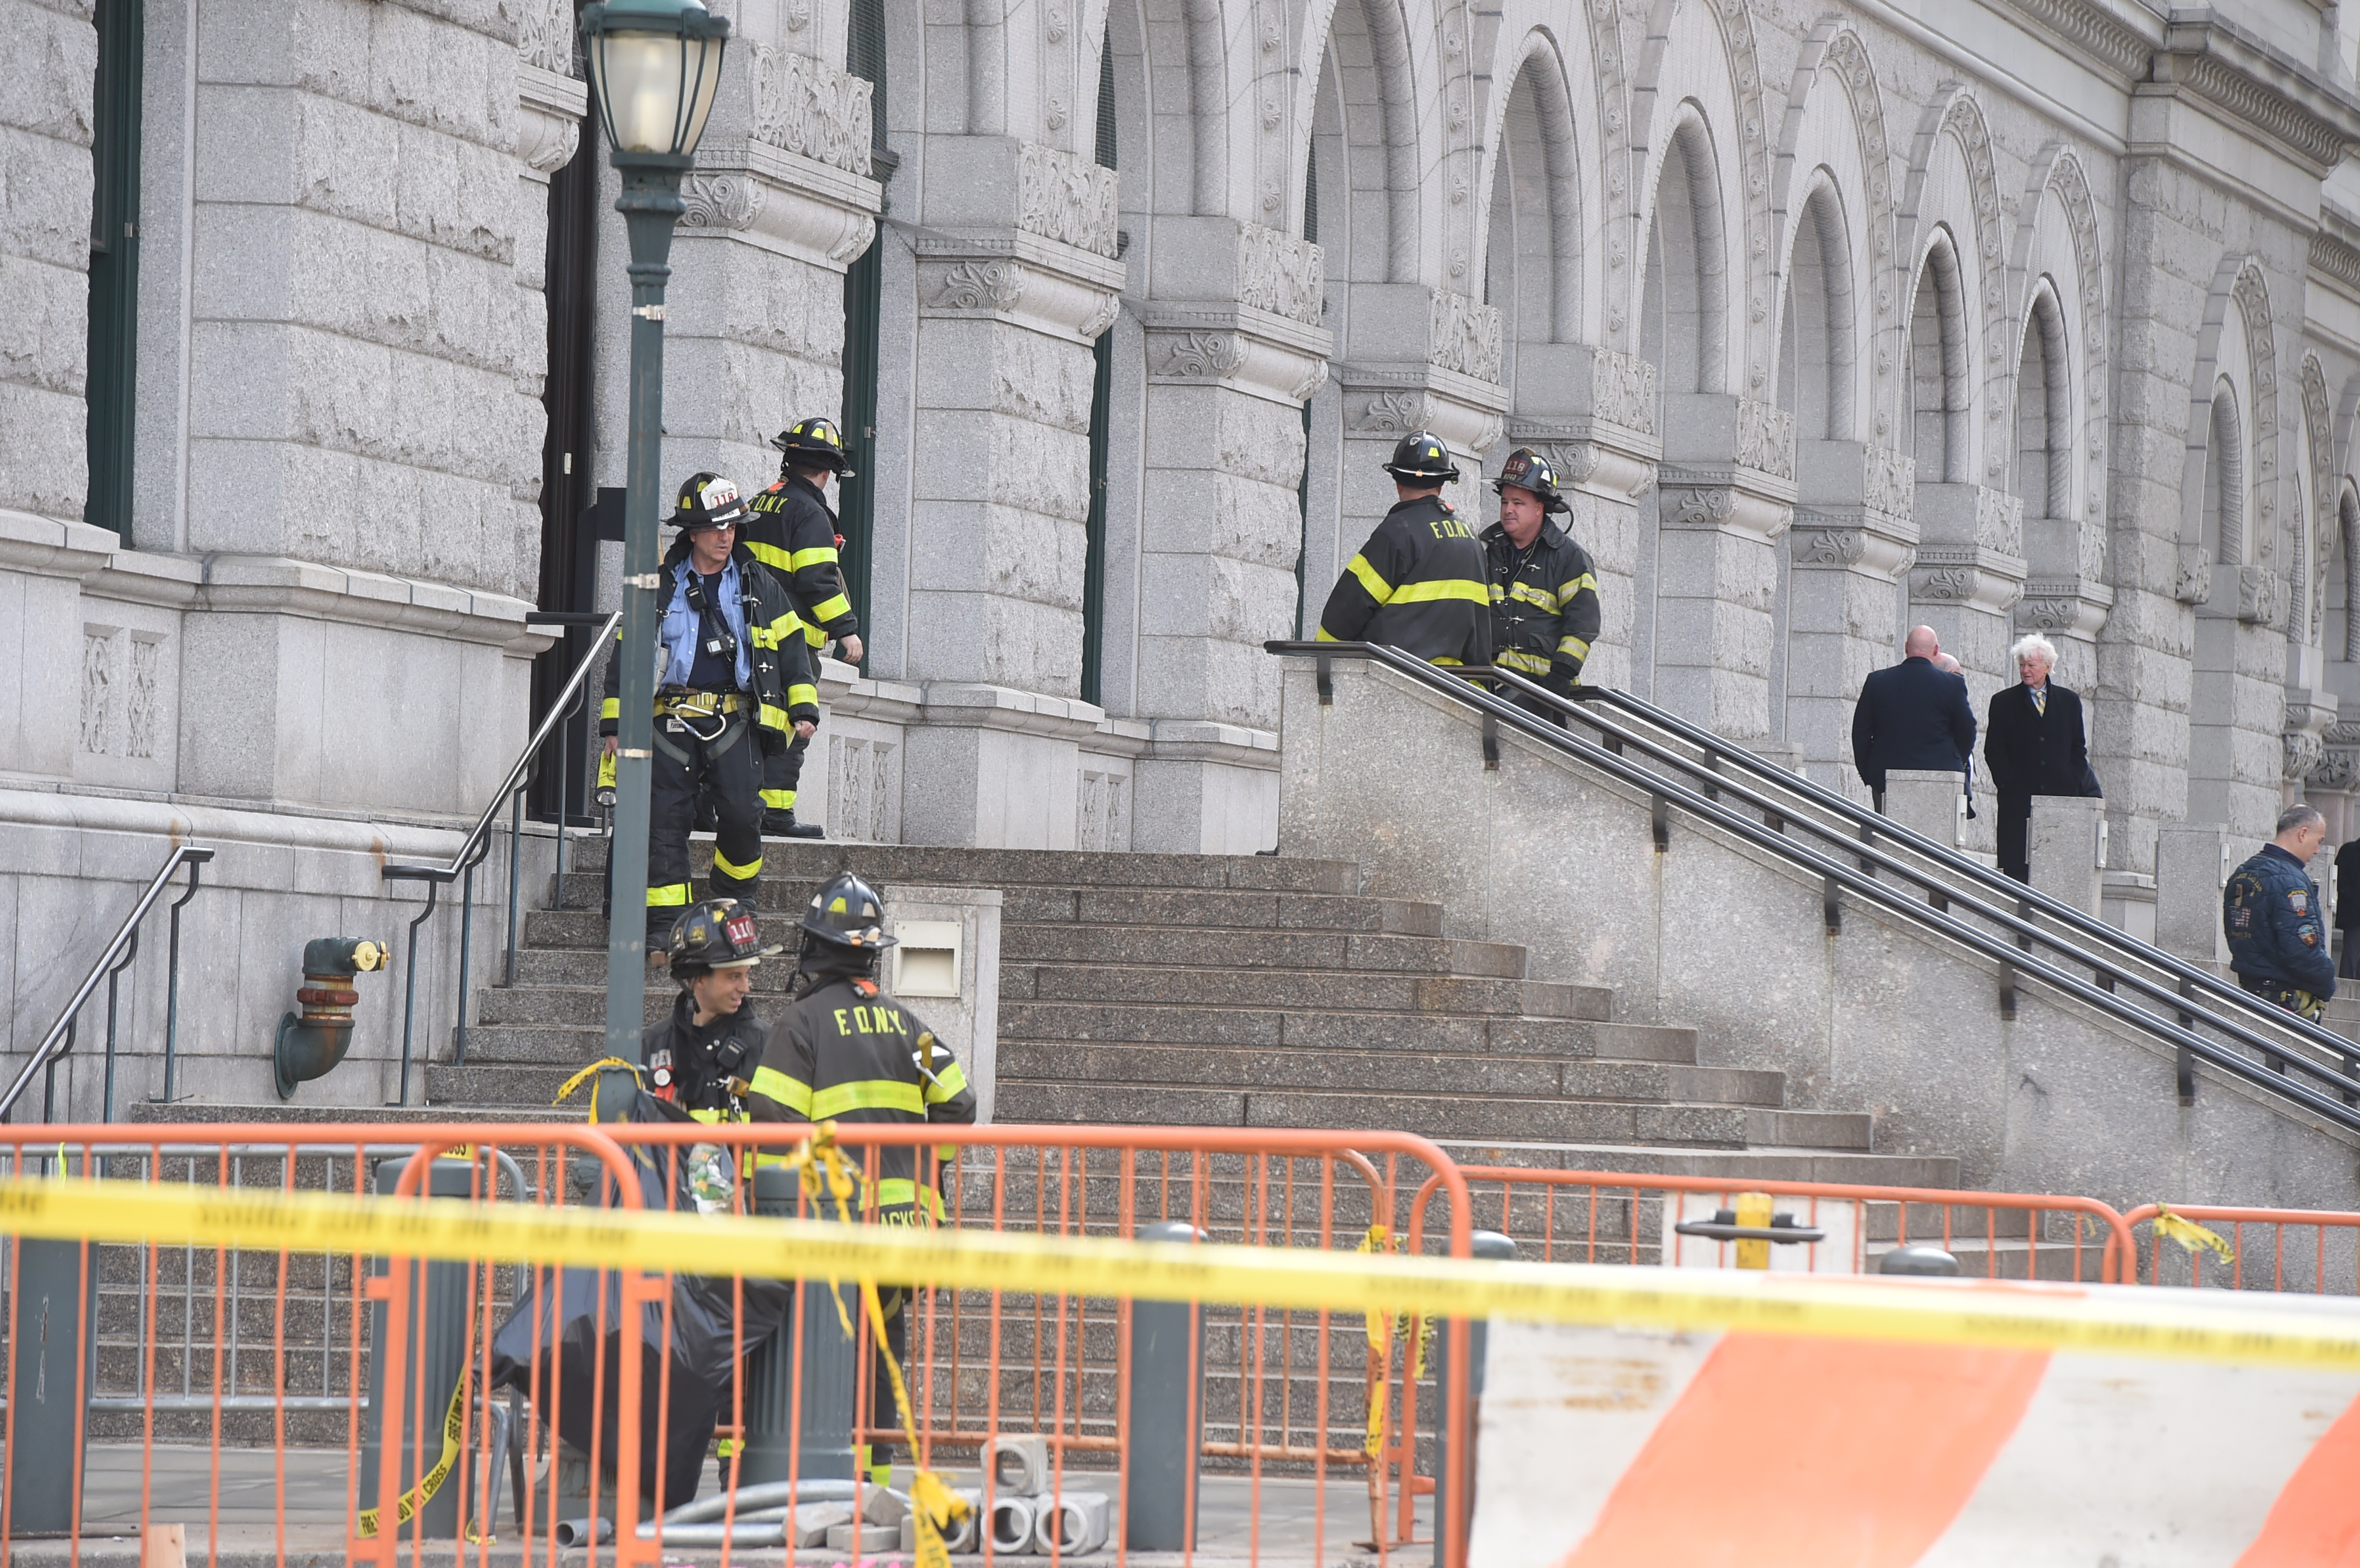 Firefighters block off the scene of a ruptured gas main in Downtown Brooklyn. Eagle photo by Todd Maisel